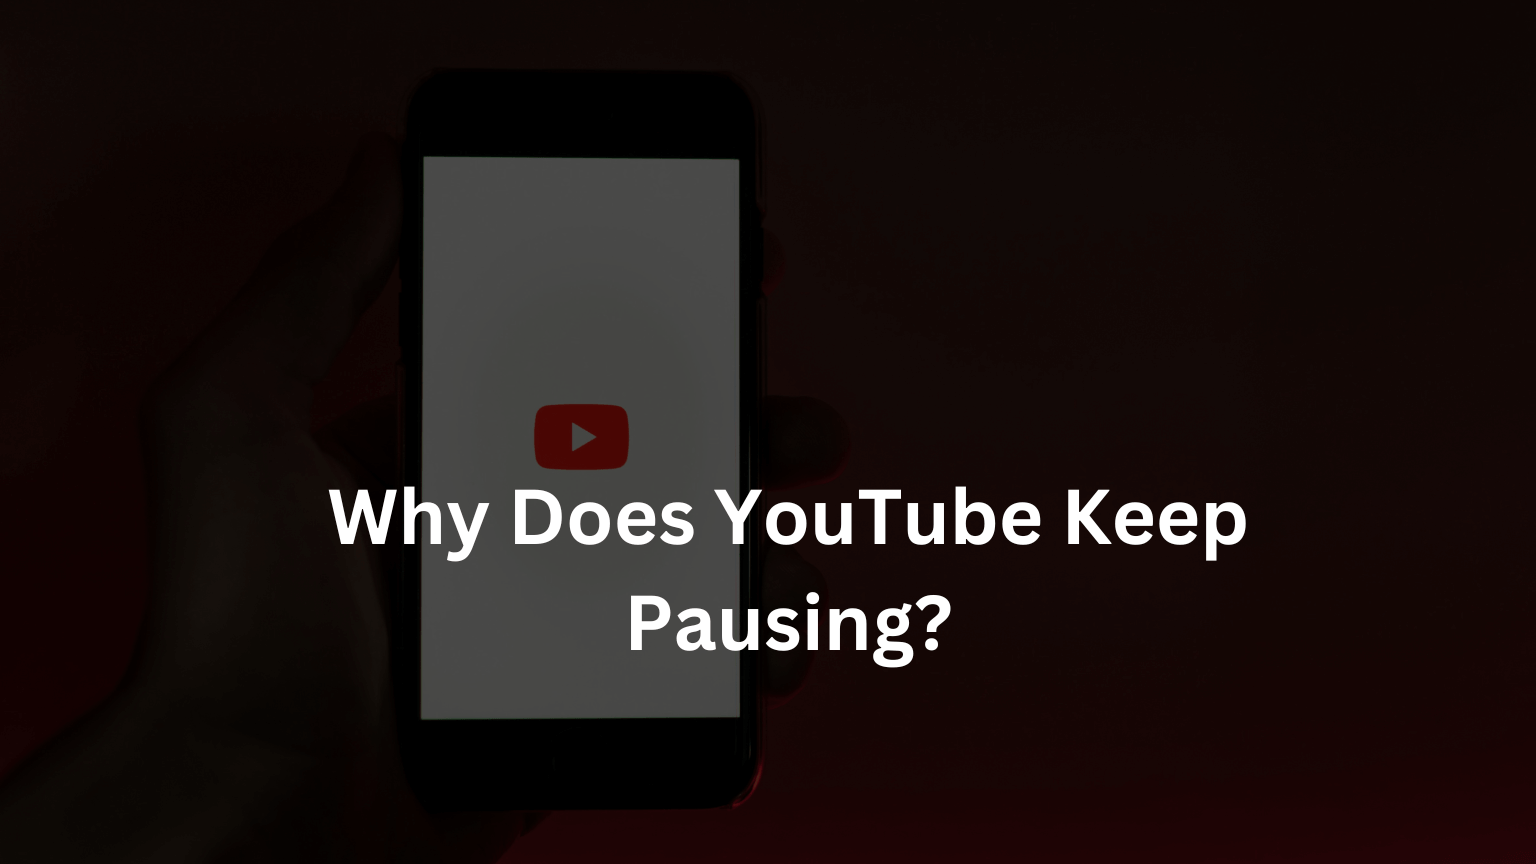 Why Does YouTube Keep Pausing?